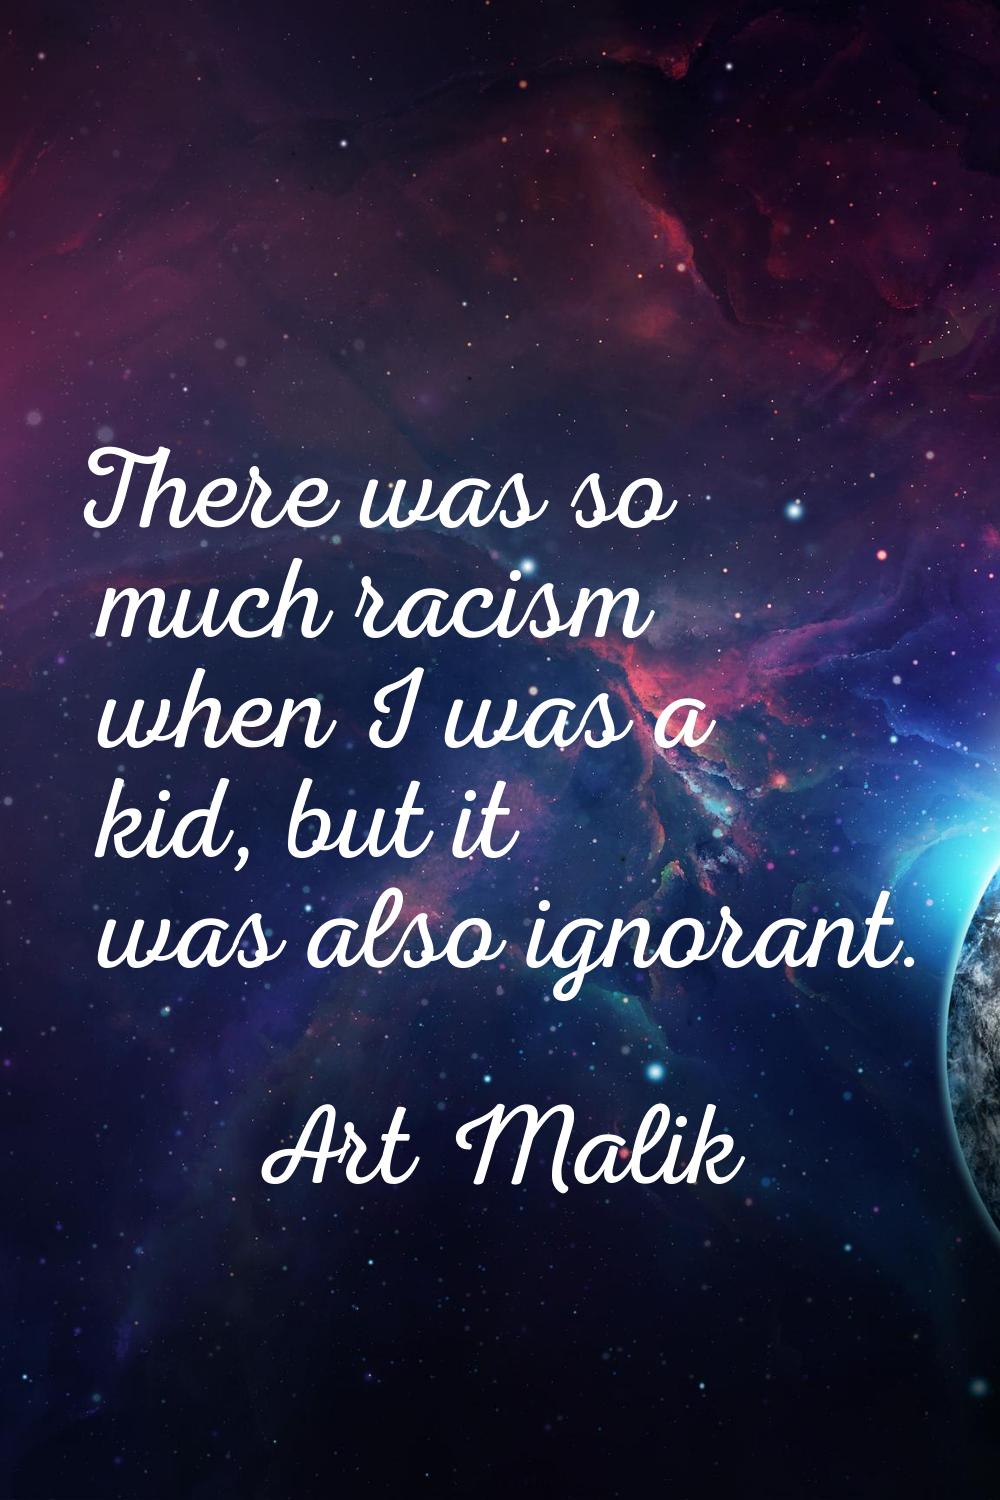 There was so much racism when I was a kid, but it was also ignorant.